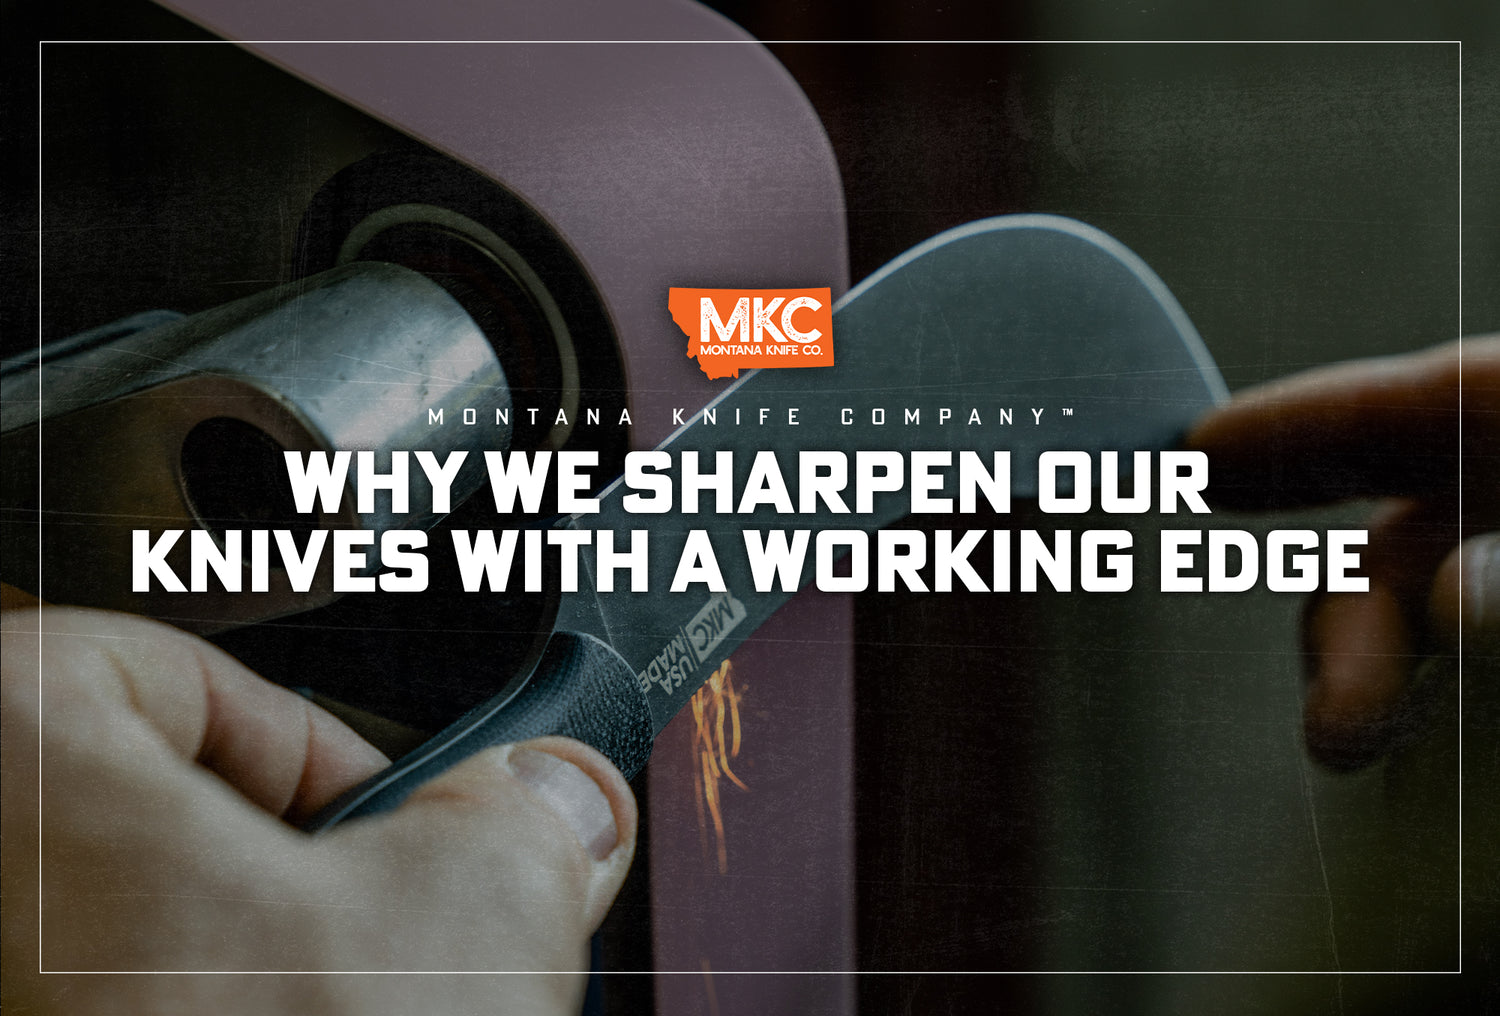 Hands hold an MKC Beartooth skinning knife against a grinder to sharpen the blade to a working edge.